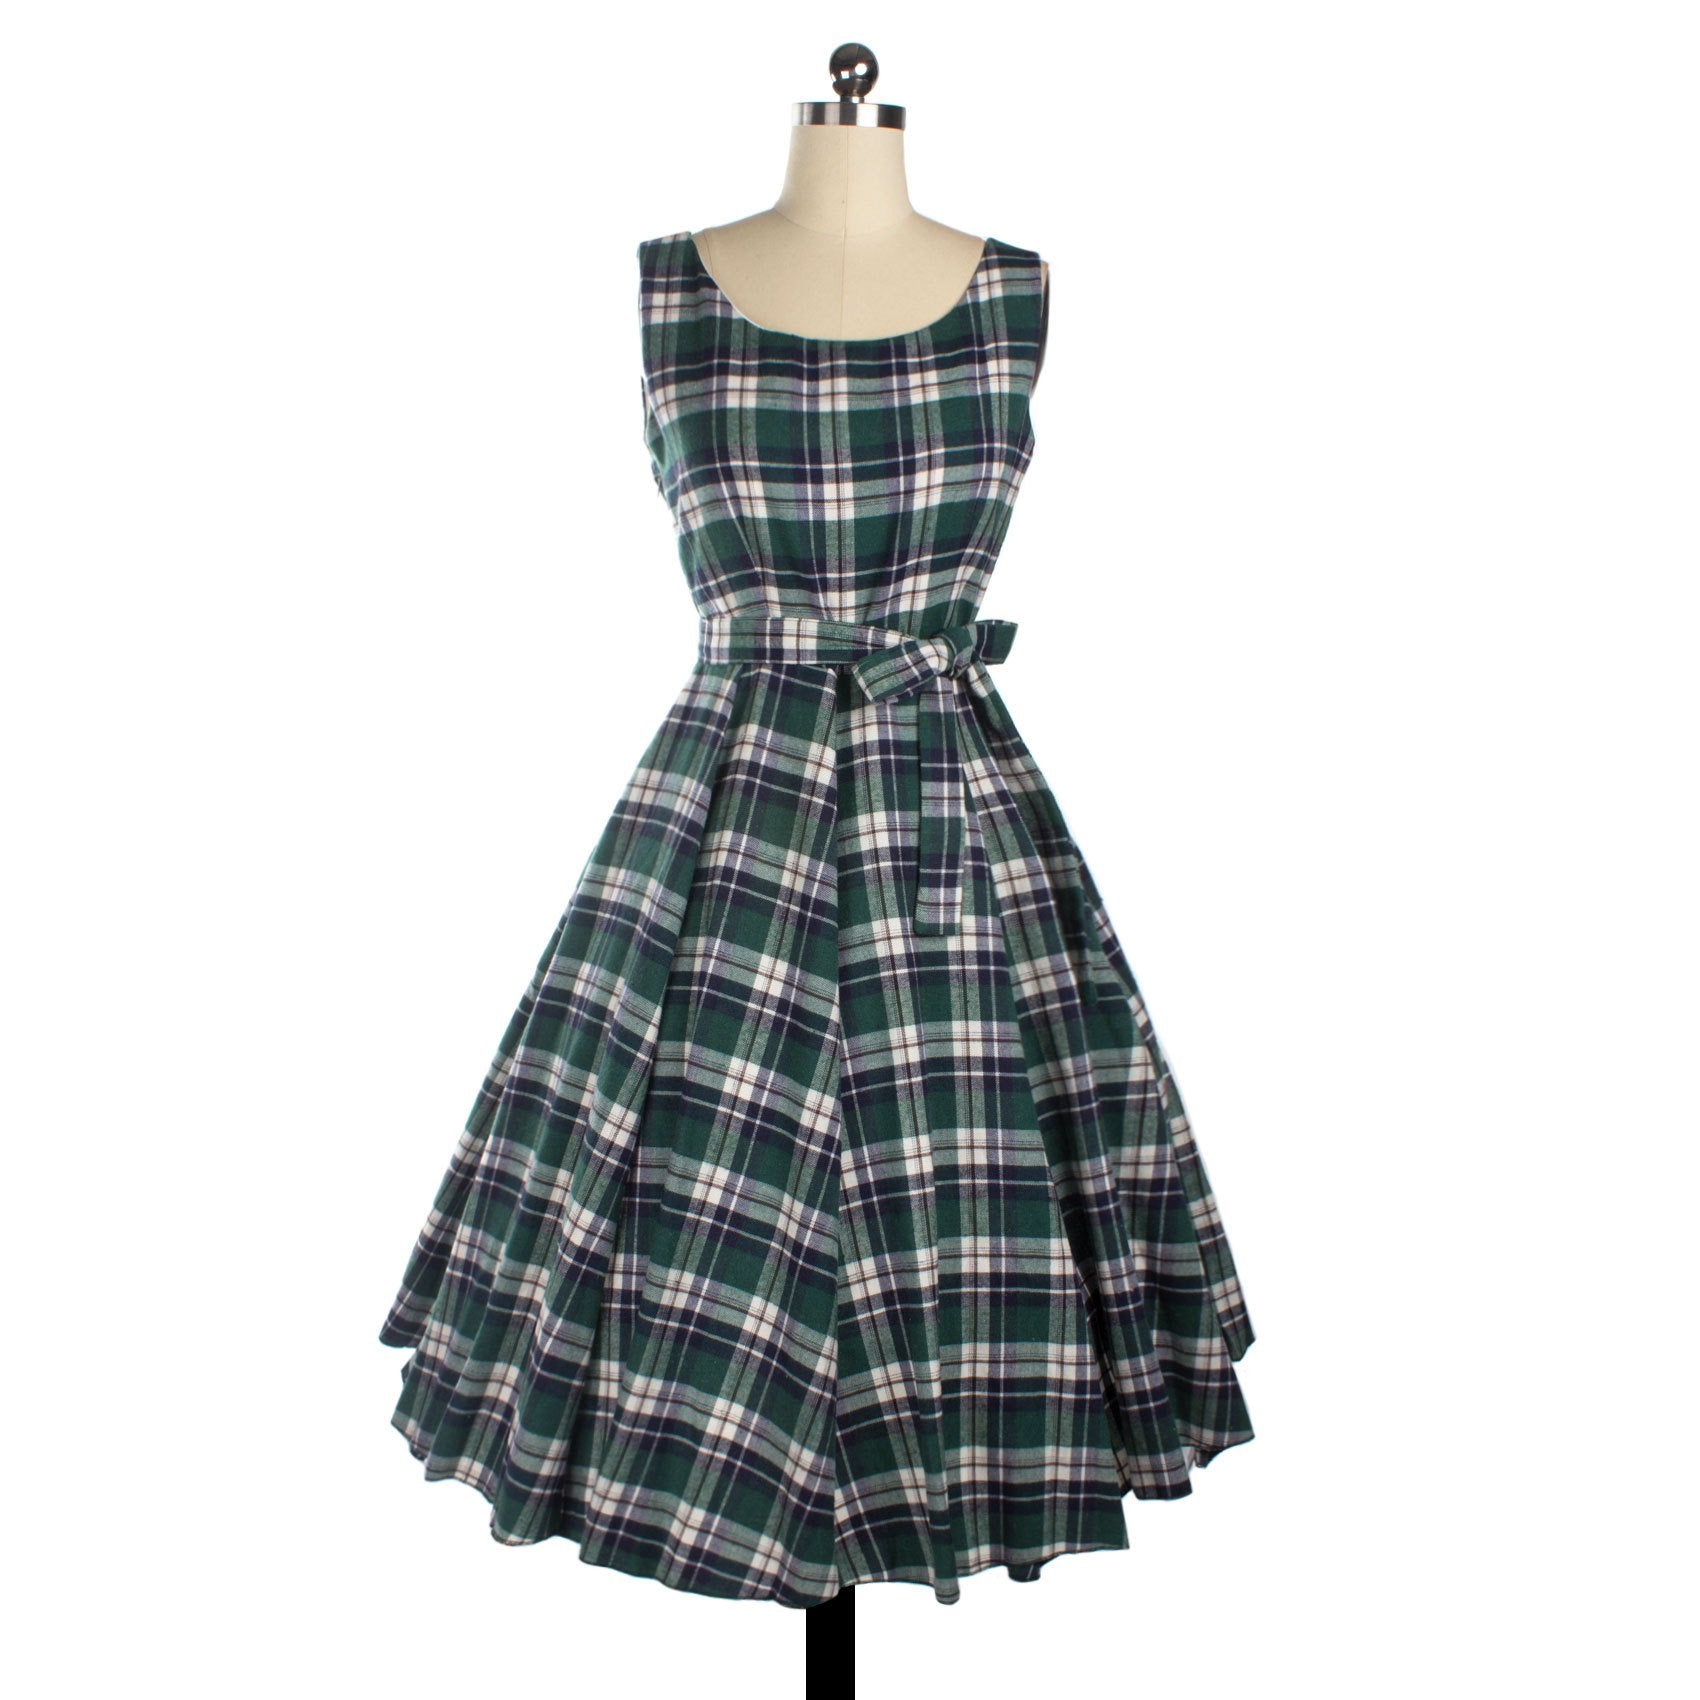 Sleeveless Bow Knot Scoop Mid-Calf Vintage Plaid Dress - Meet Yours Fashion - 4